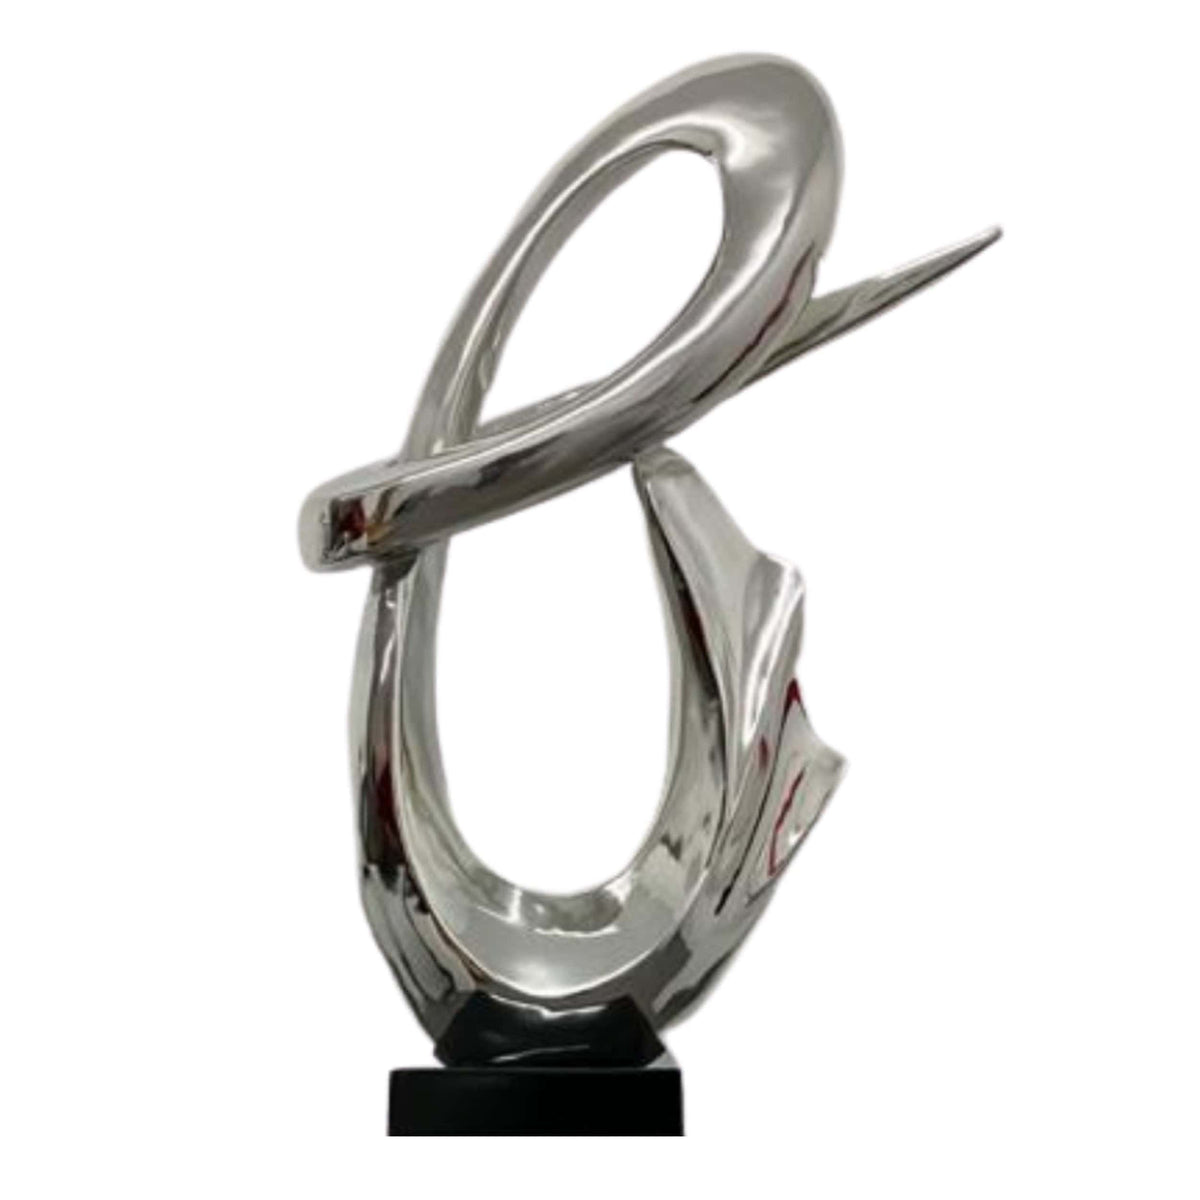 Chrome Fluid Abstract Floor Sculpture With White Stand, 59" Tall